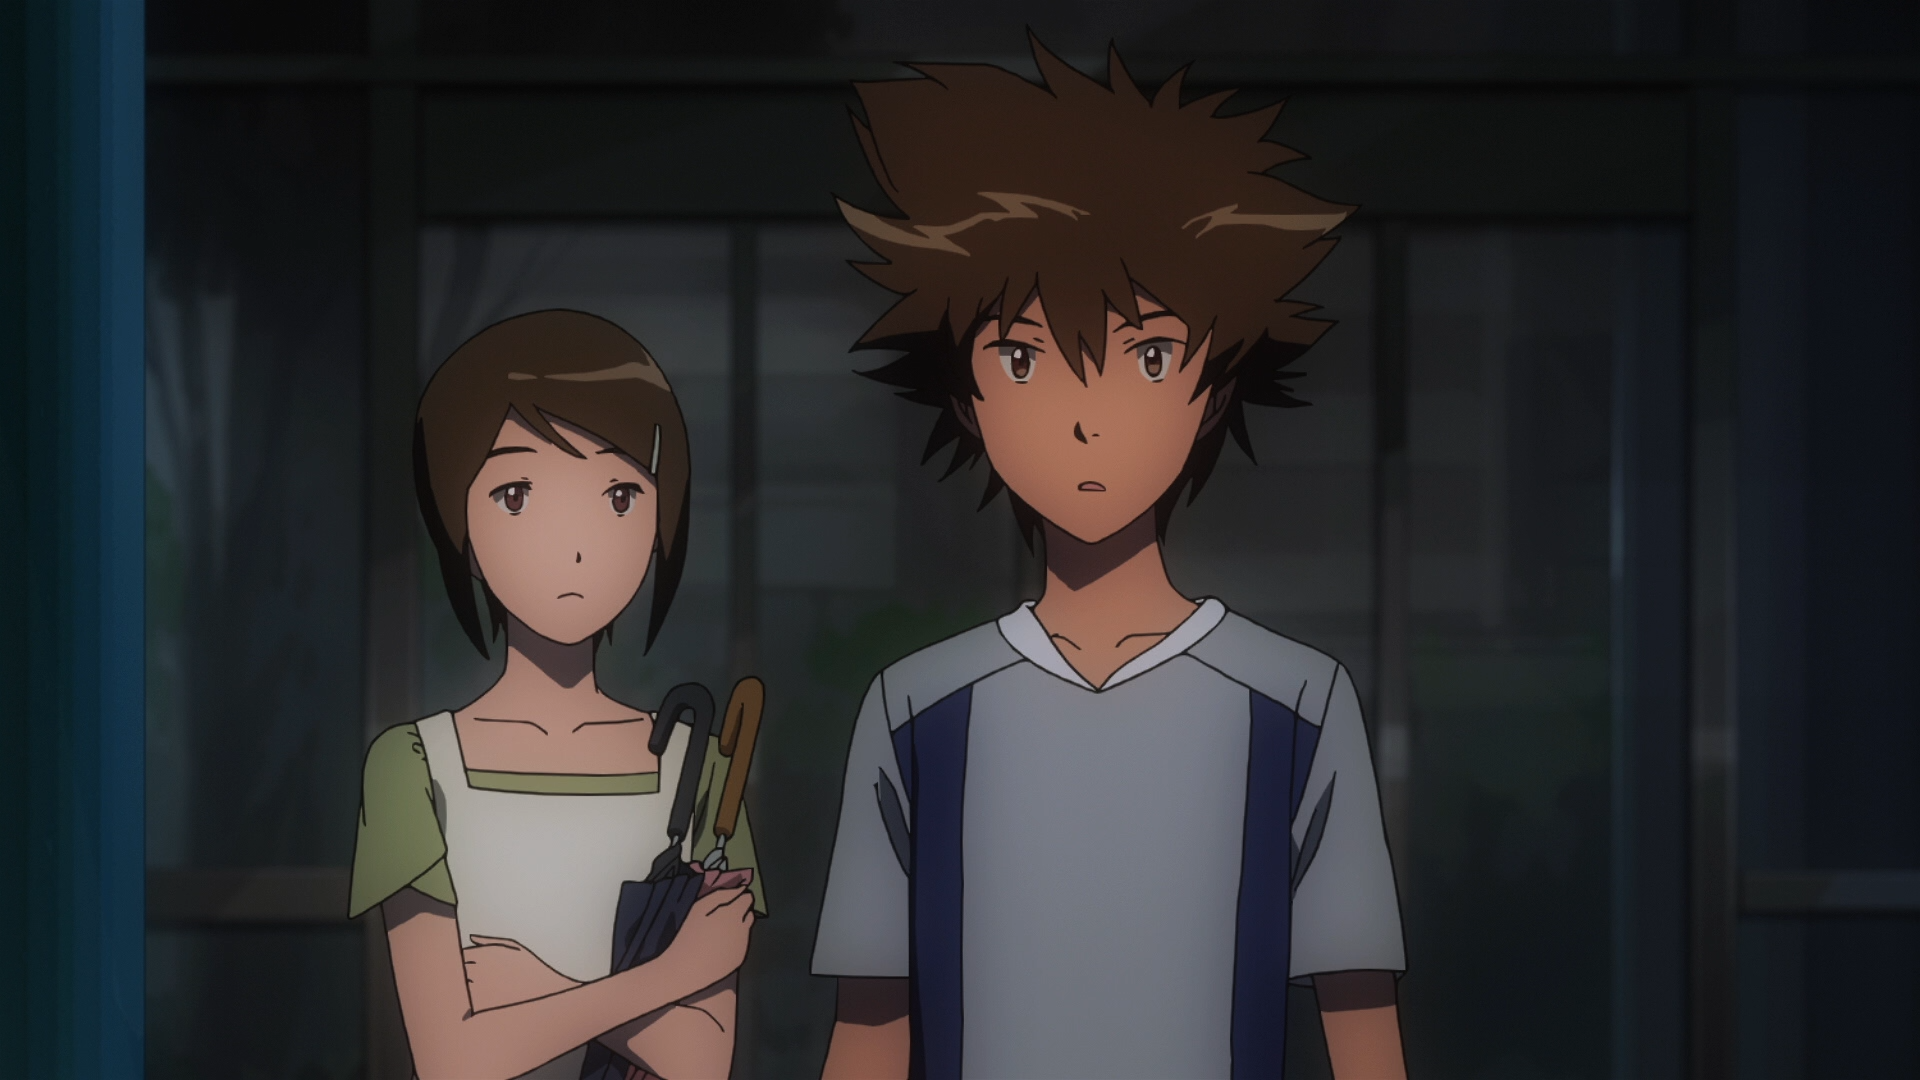 Realize Your DigiDreams With U.S. Screenings of Digimon Adventure tri.!